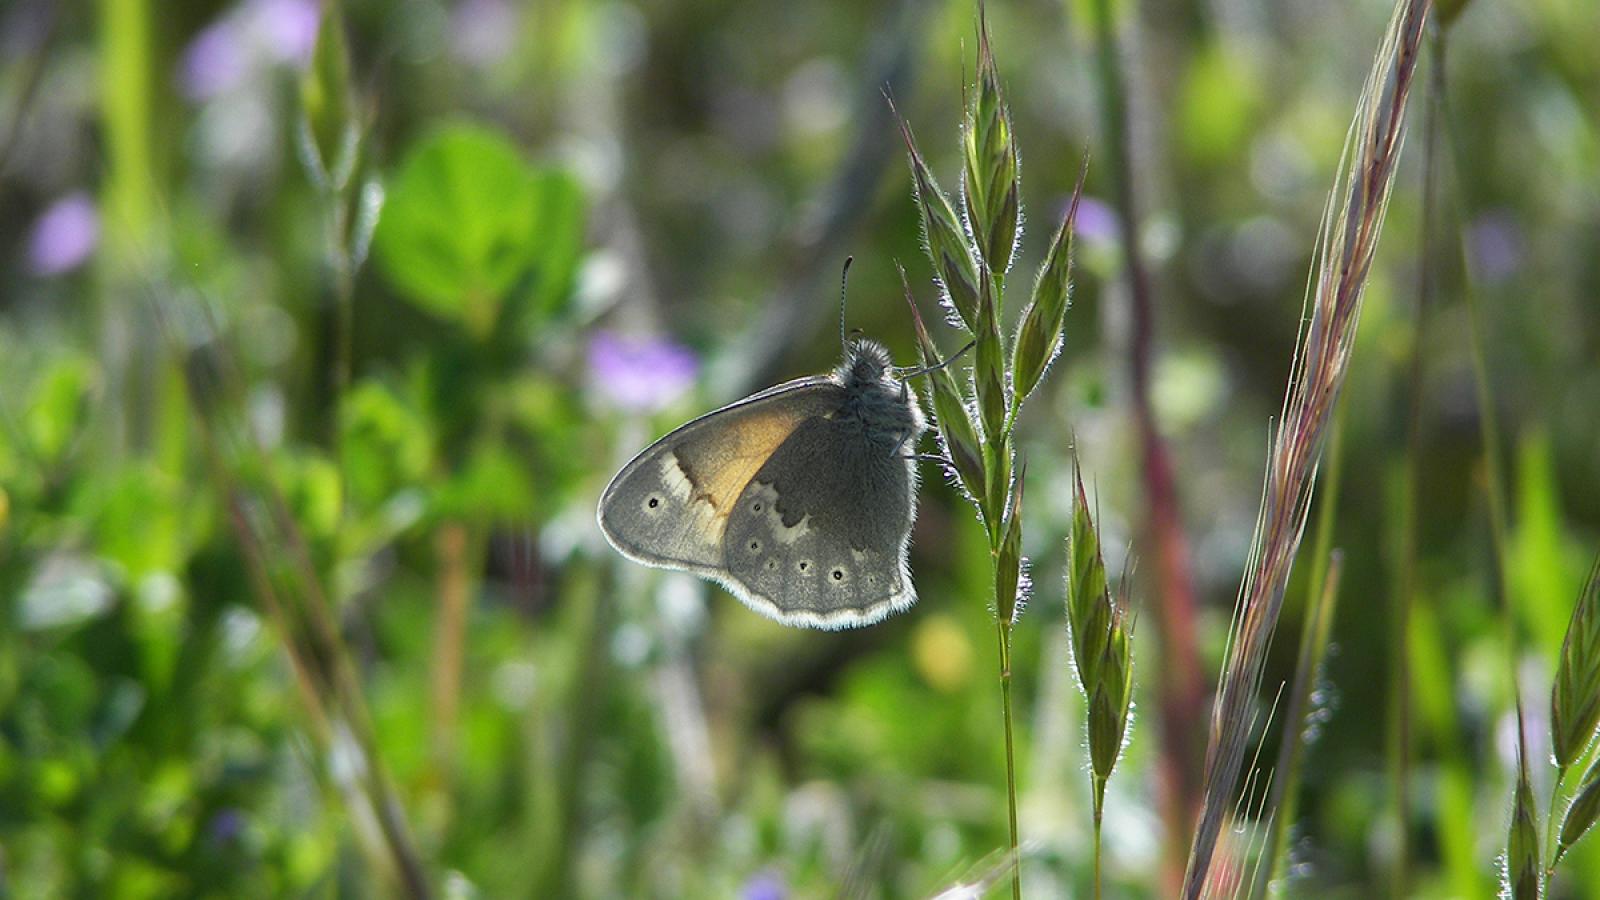 a yellowish-brown butterfly perched on a stalk of grass